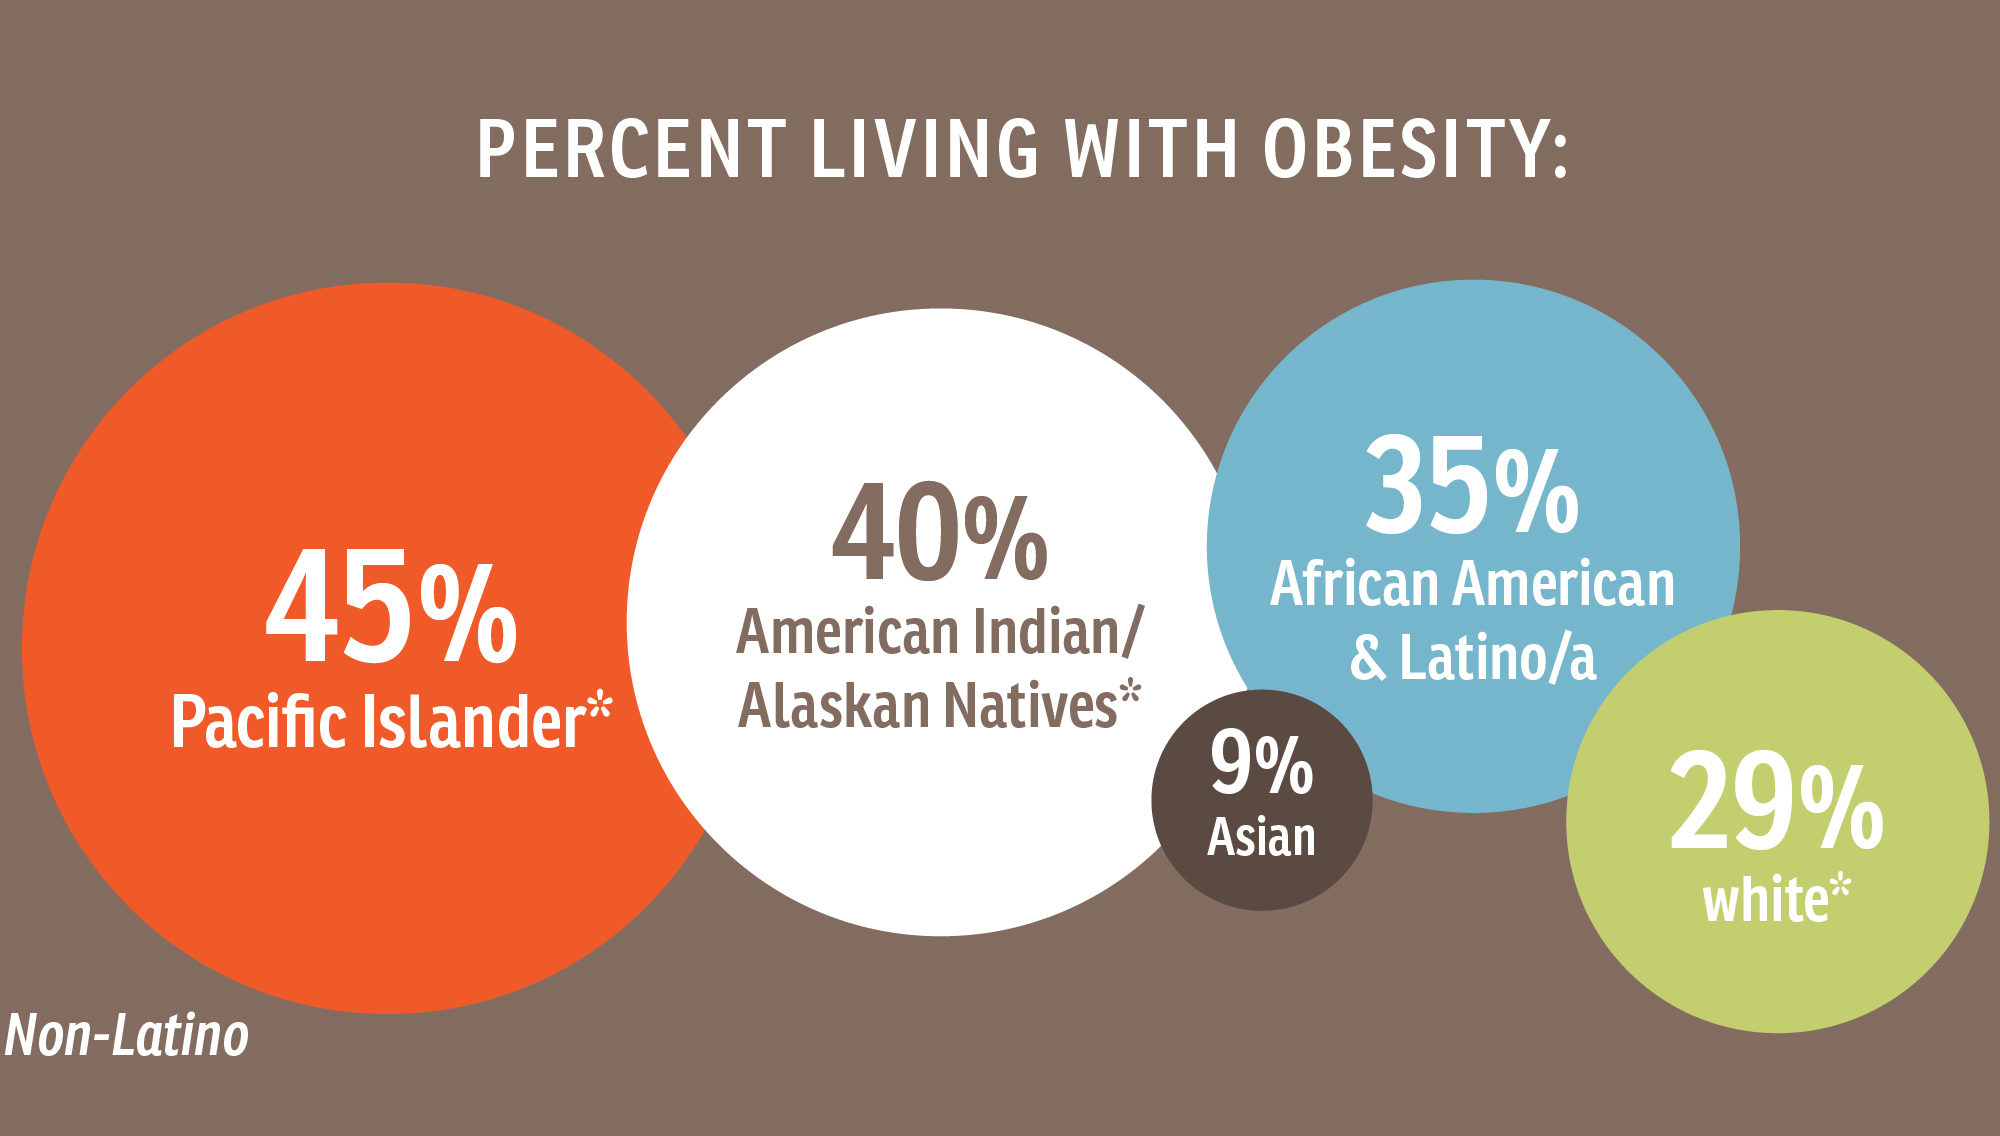 Five bubbles showing percent living with obesity. The first bubble is Pacific Islander at 45%. The second bubble is American Indian/Alaskan Natives at 40%. Third bubble is Asian at 9%. Fourth bubble is African American and Latino/a at 35%. Fifth bubble is white at 29%.